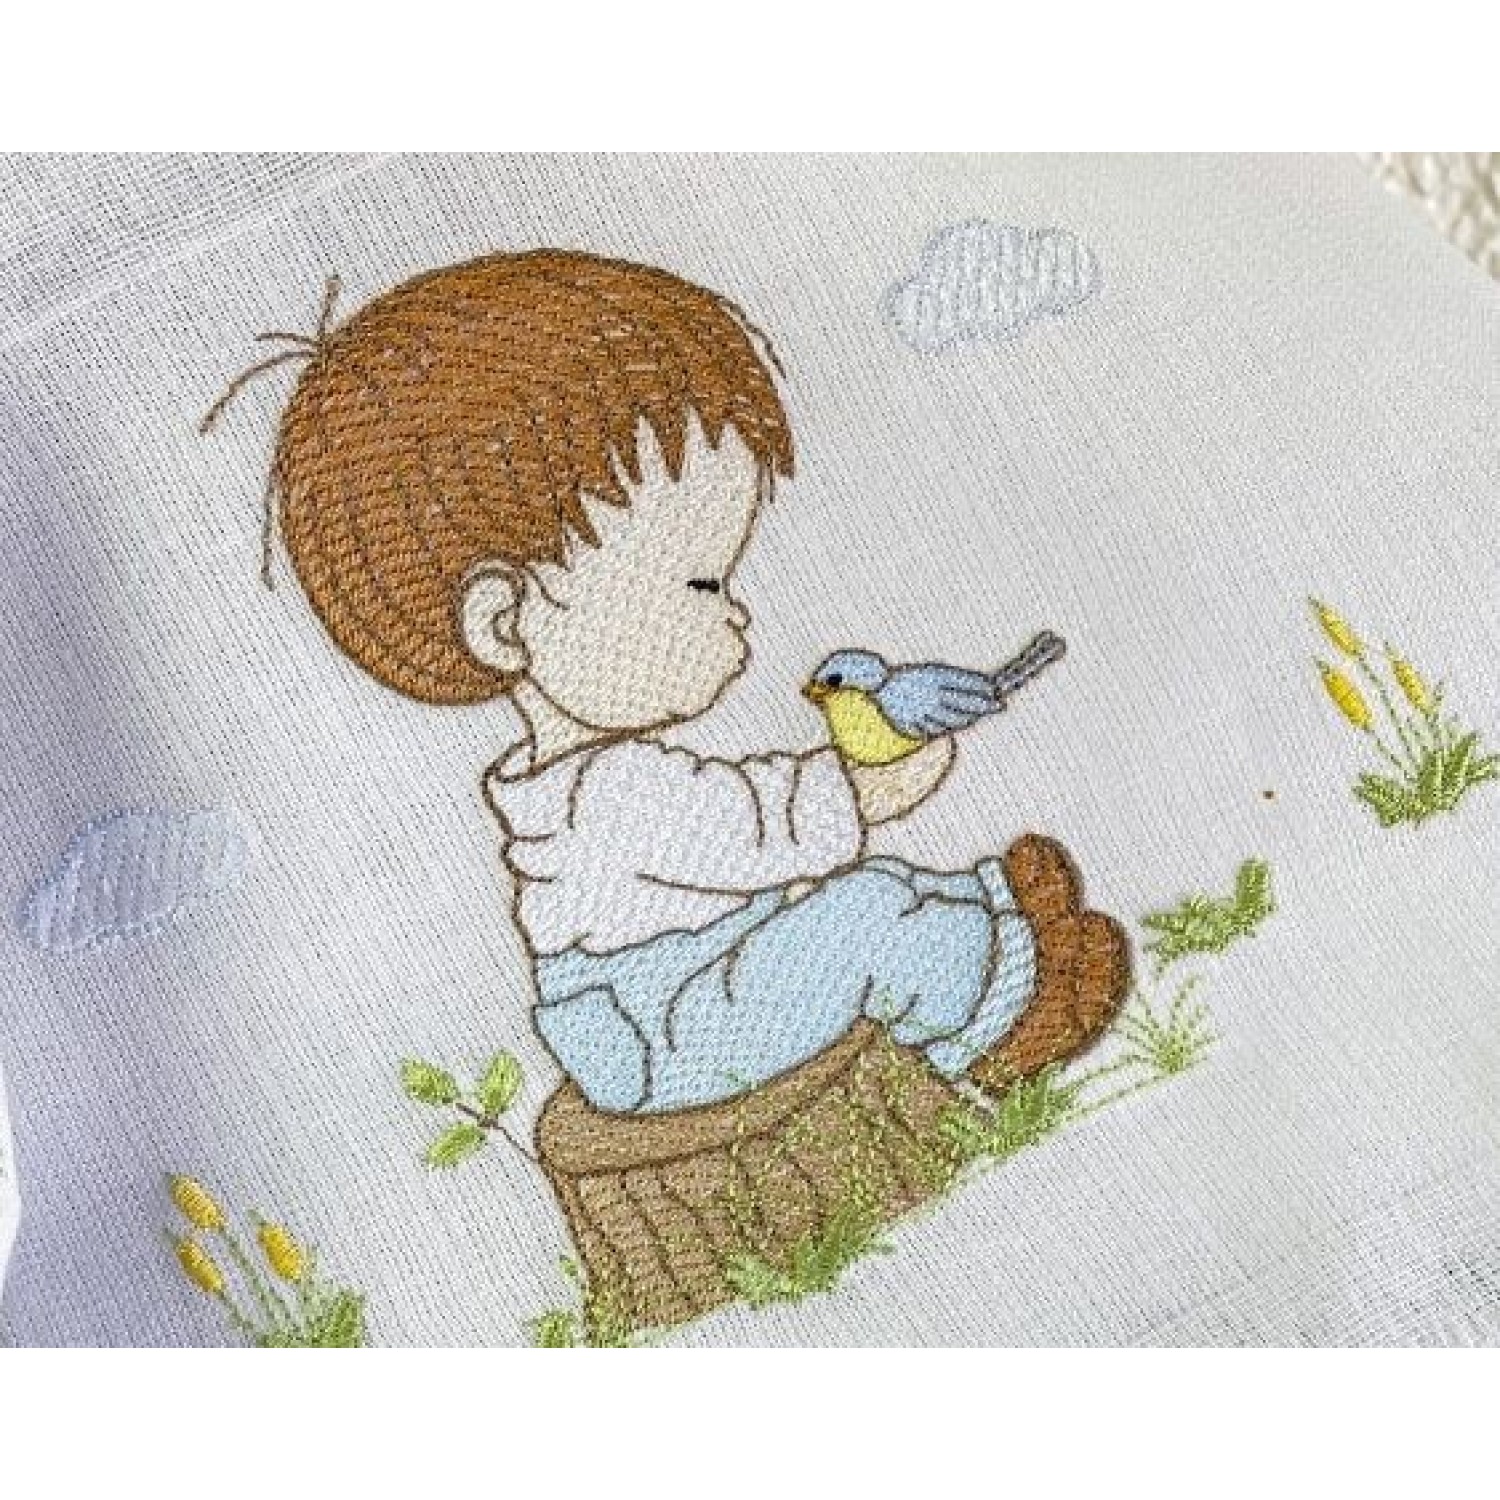 Little Boy With A Bird Embroidery Design